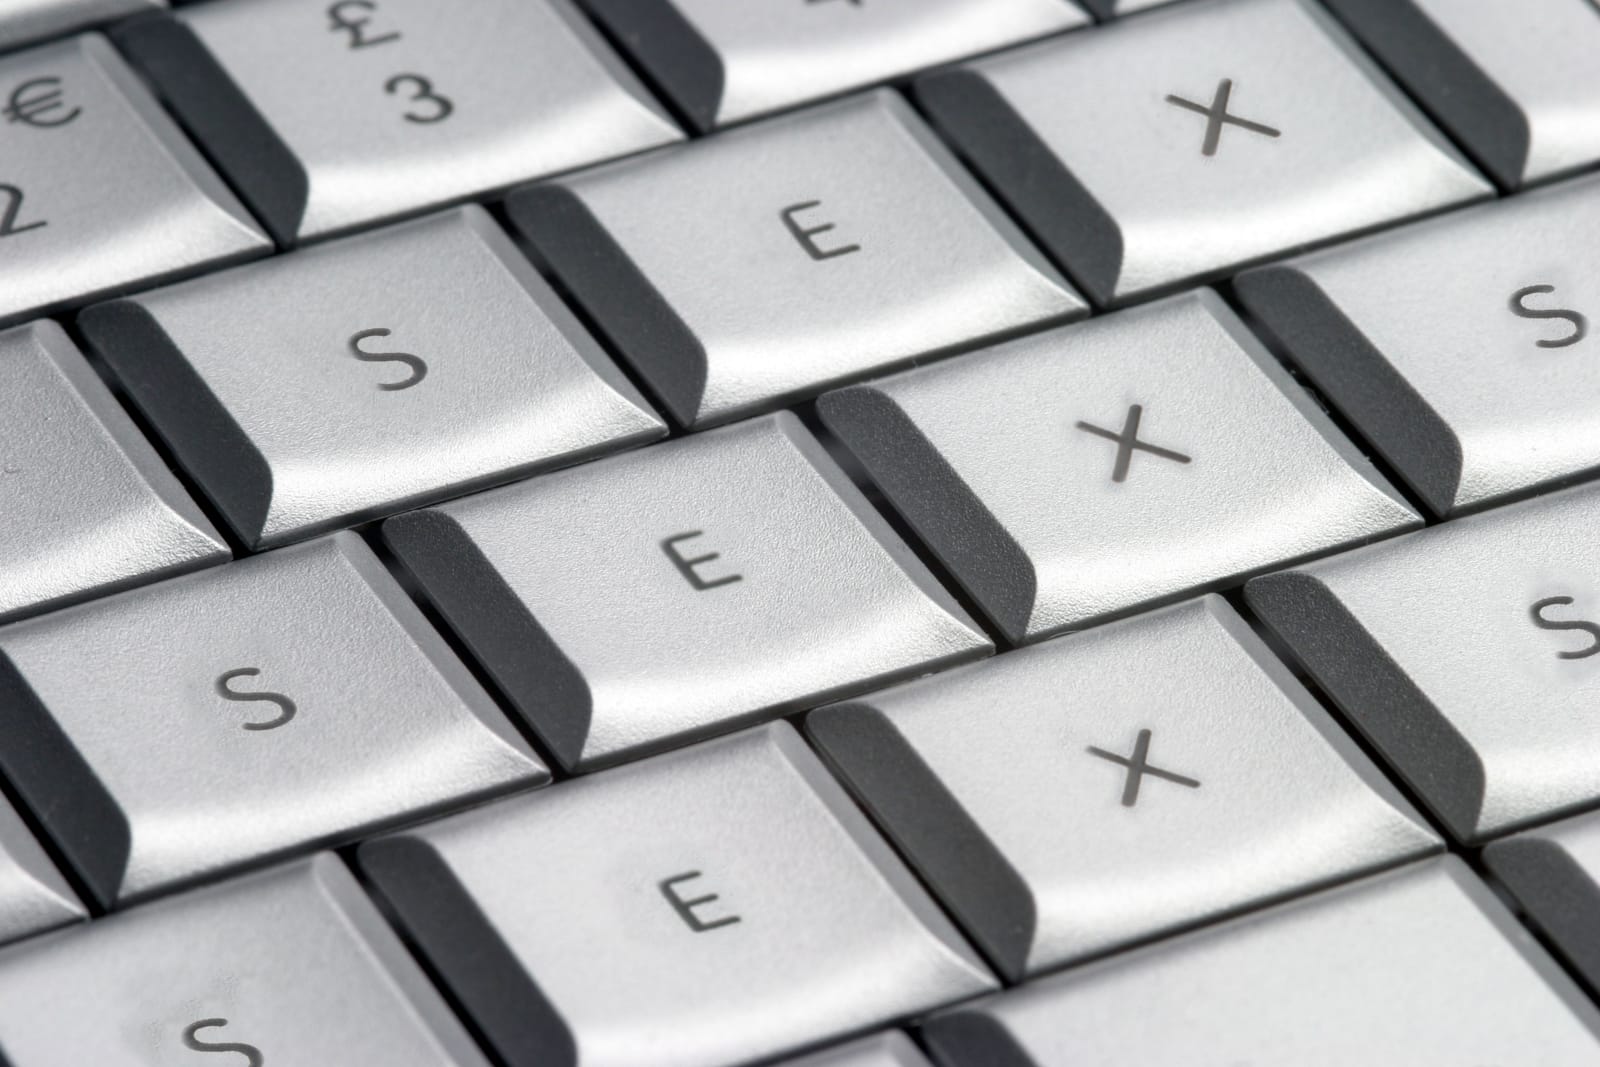 Close up of a computer keyboard with all of the keys spelling out SEX